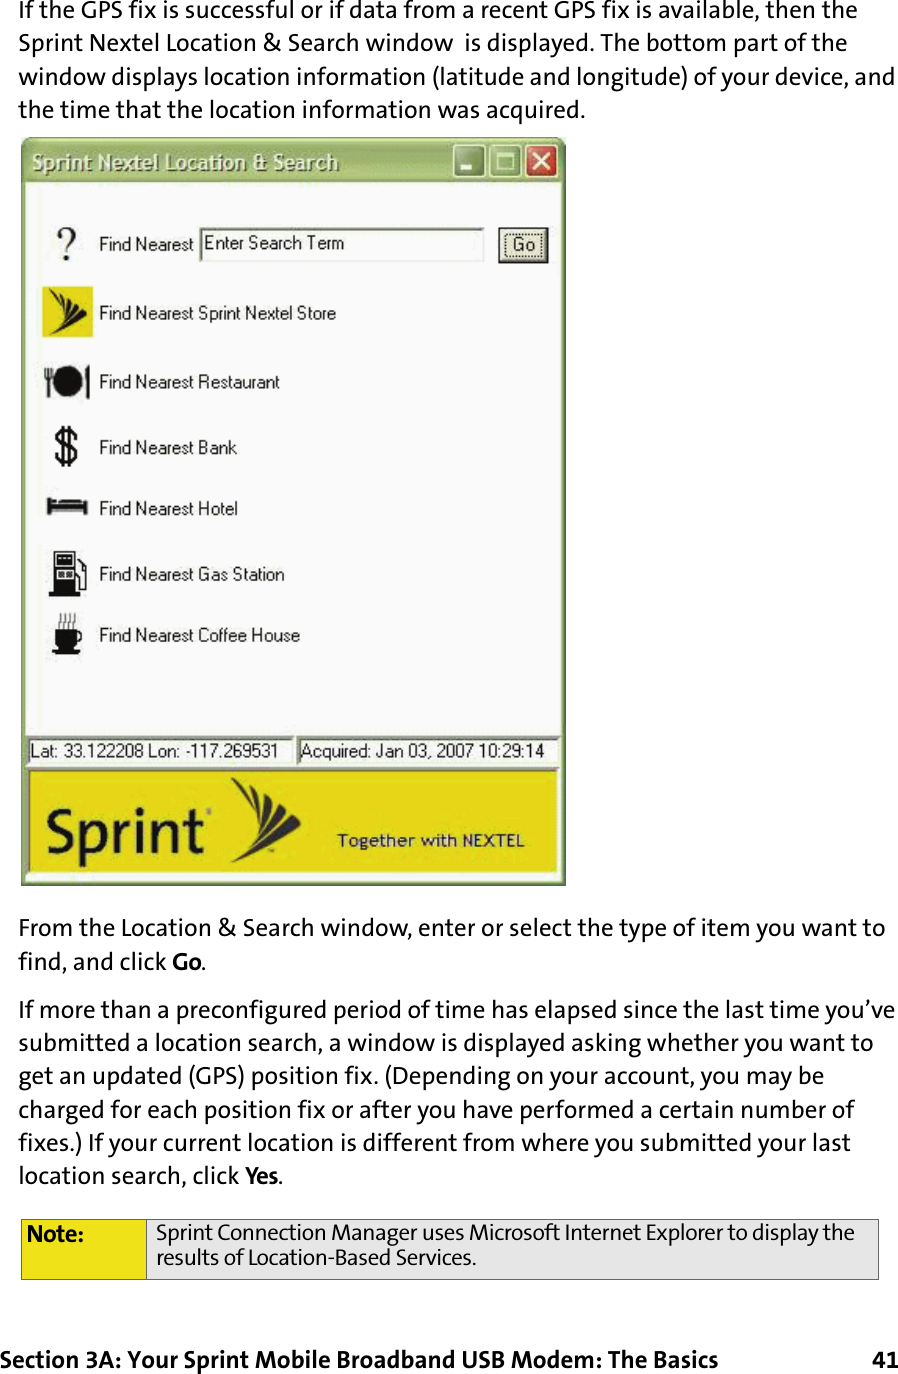 Section 3A: Your Sprint Mobile Broadband USB Modem: The Basics      41If the GPS fix is successful or if data from a recent GPS fix is available, then the Sprint Nextel Location &amp; Search window  is displayed. The bottom part of the window displays location information (latitude and longitude) of your device, and the time that the location information was acquired.From the Location &amp; Search window, enter or select the type of item you want to find, and click Go.If more than a preconfigured period of time has elapsed since the last time you’ve submitted a location search, a window is displayed asking whether you want to get an updated (GPS) position fix. (Depending on your account, you may be charged for each position fix or after you have performed a certain number of fixes.) If your current location is different from where you submitted your last location search, click Yes.Note: Sprint Connection Manager uses Microsoft Internet Explorer to display the results of Location-Based Services.